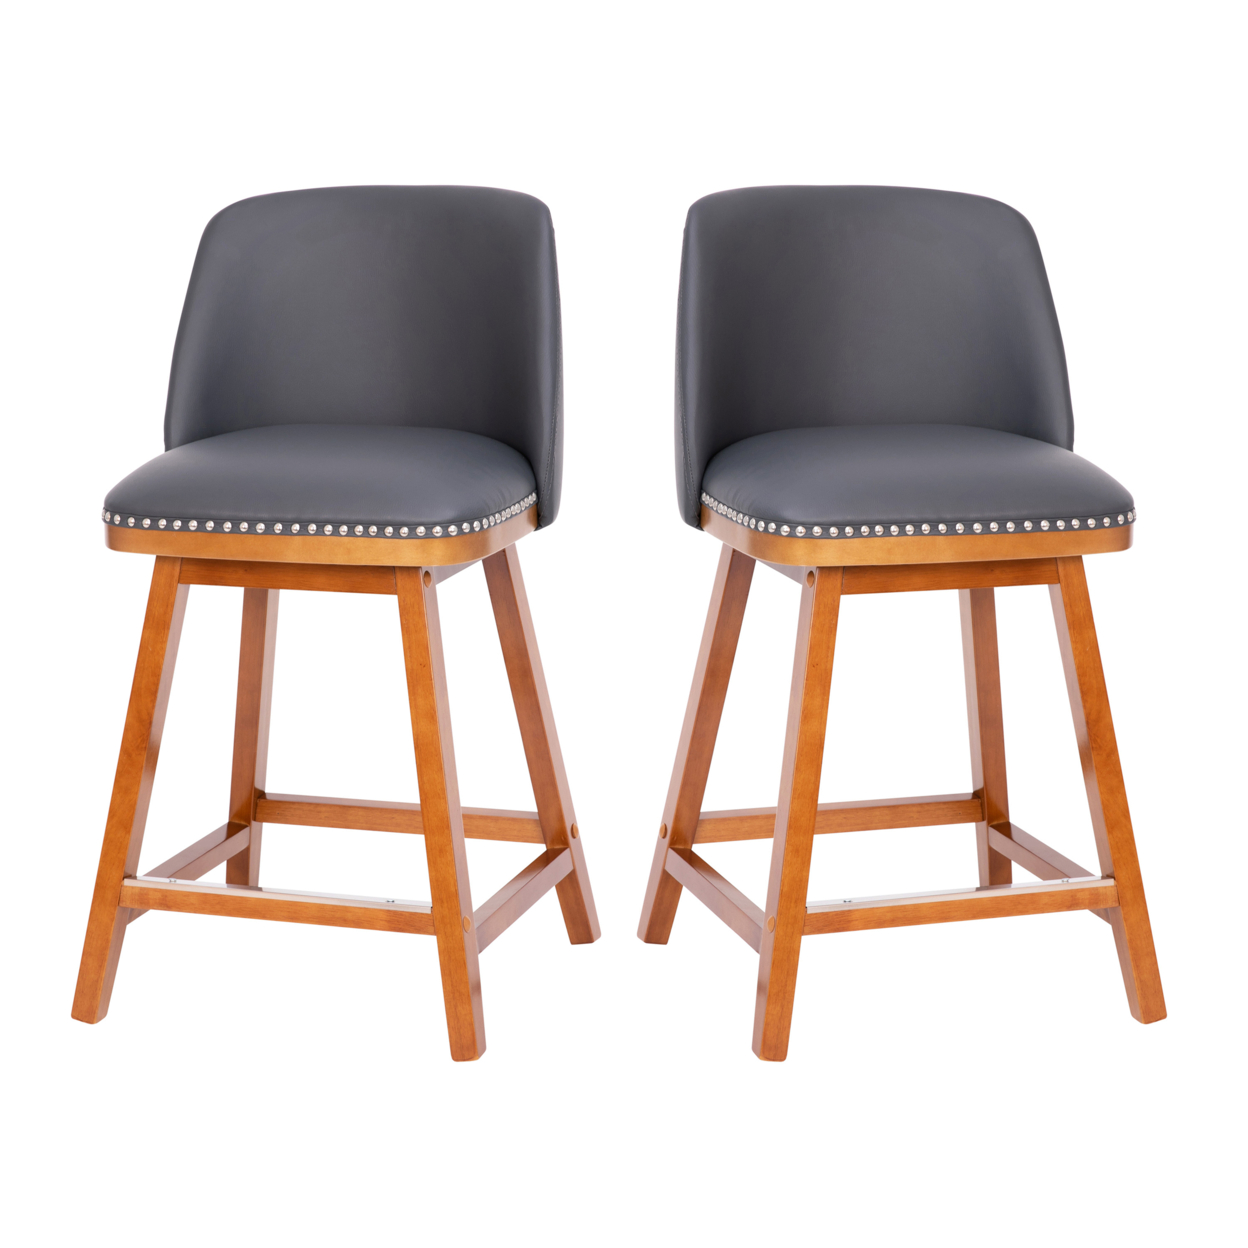 2 Piece 24 Inch Leather Stools, Curved Back, Seat, Nailhead Trims, Gray